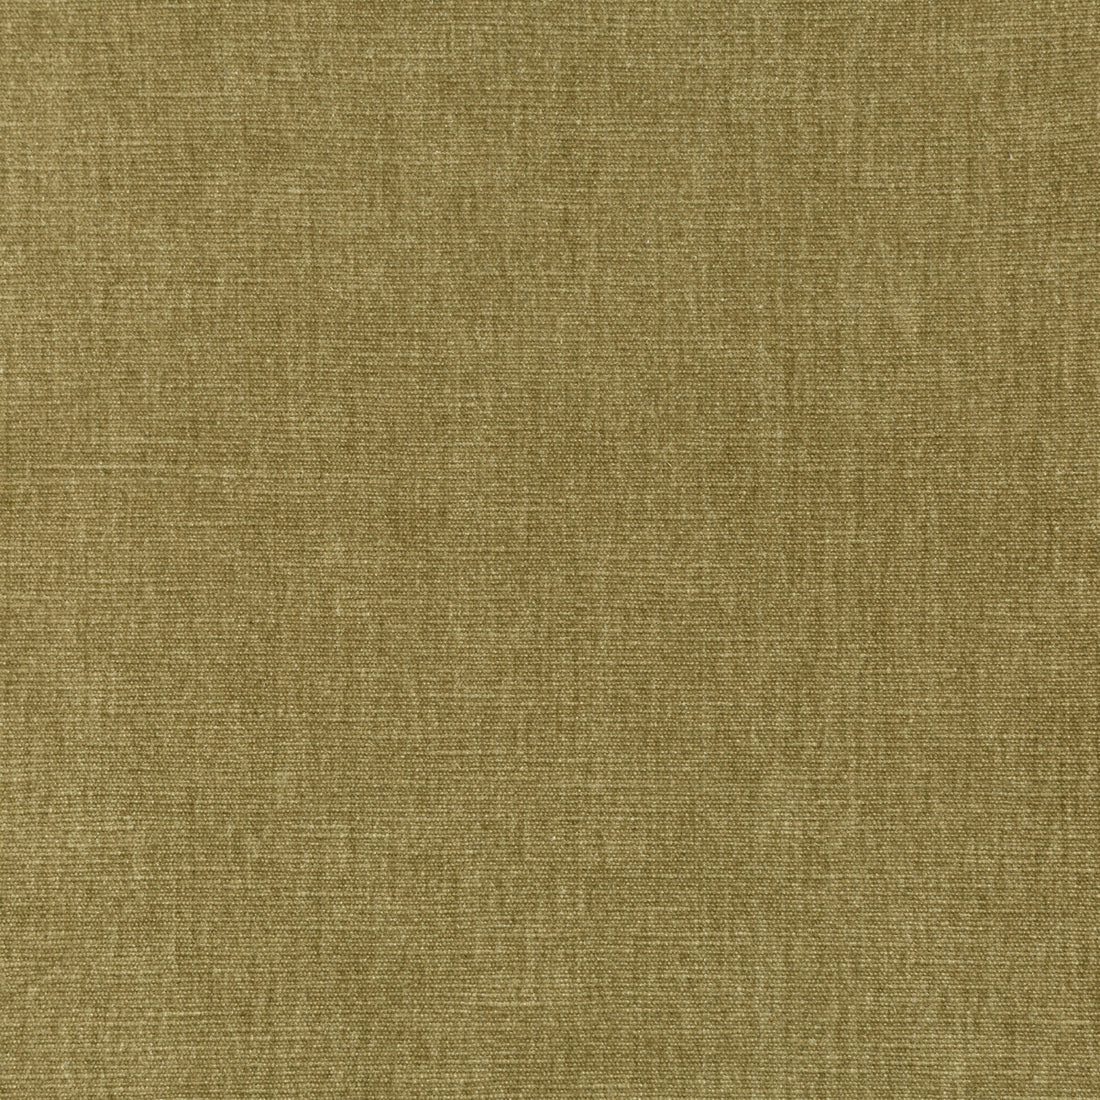 Kravet Smart fabric in 36076-616 color - pattern 36076.616.0 - by Kravet Smart in the Sumptuous Chenille II collection